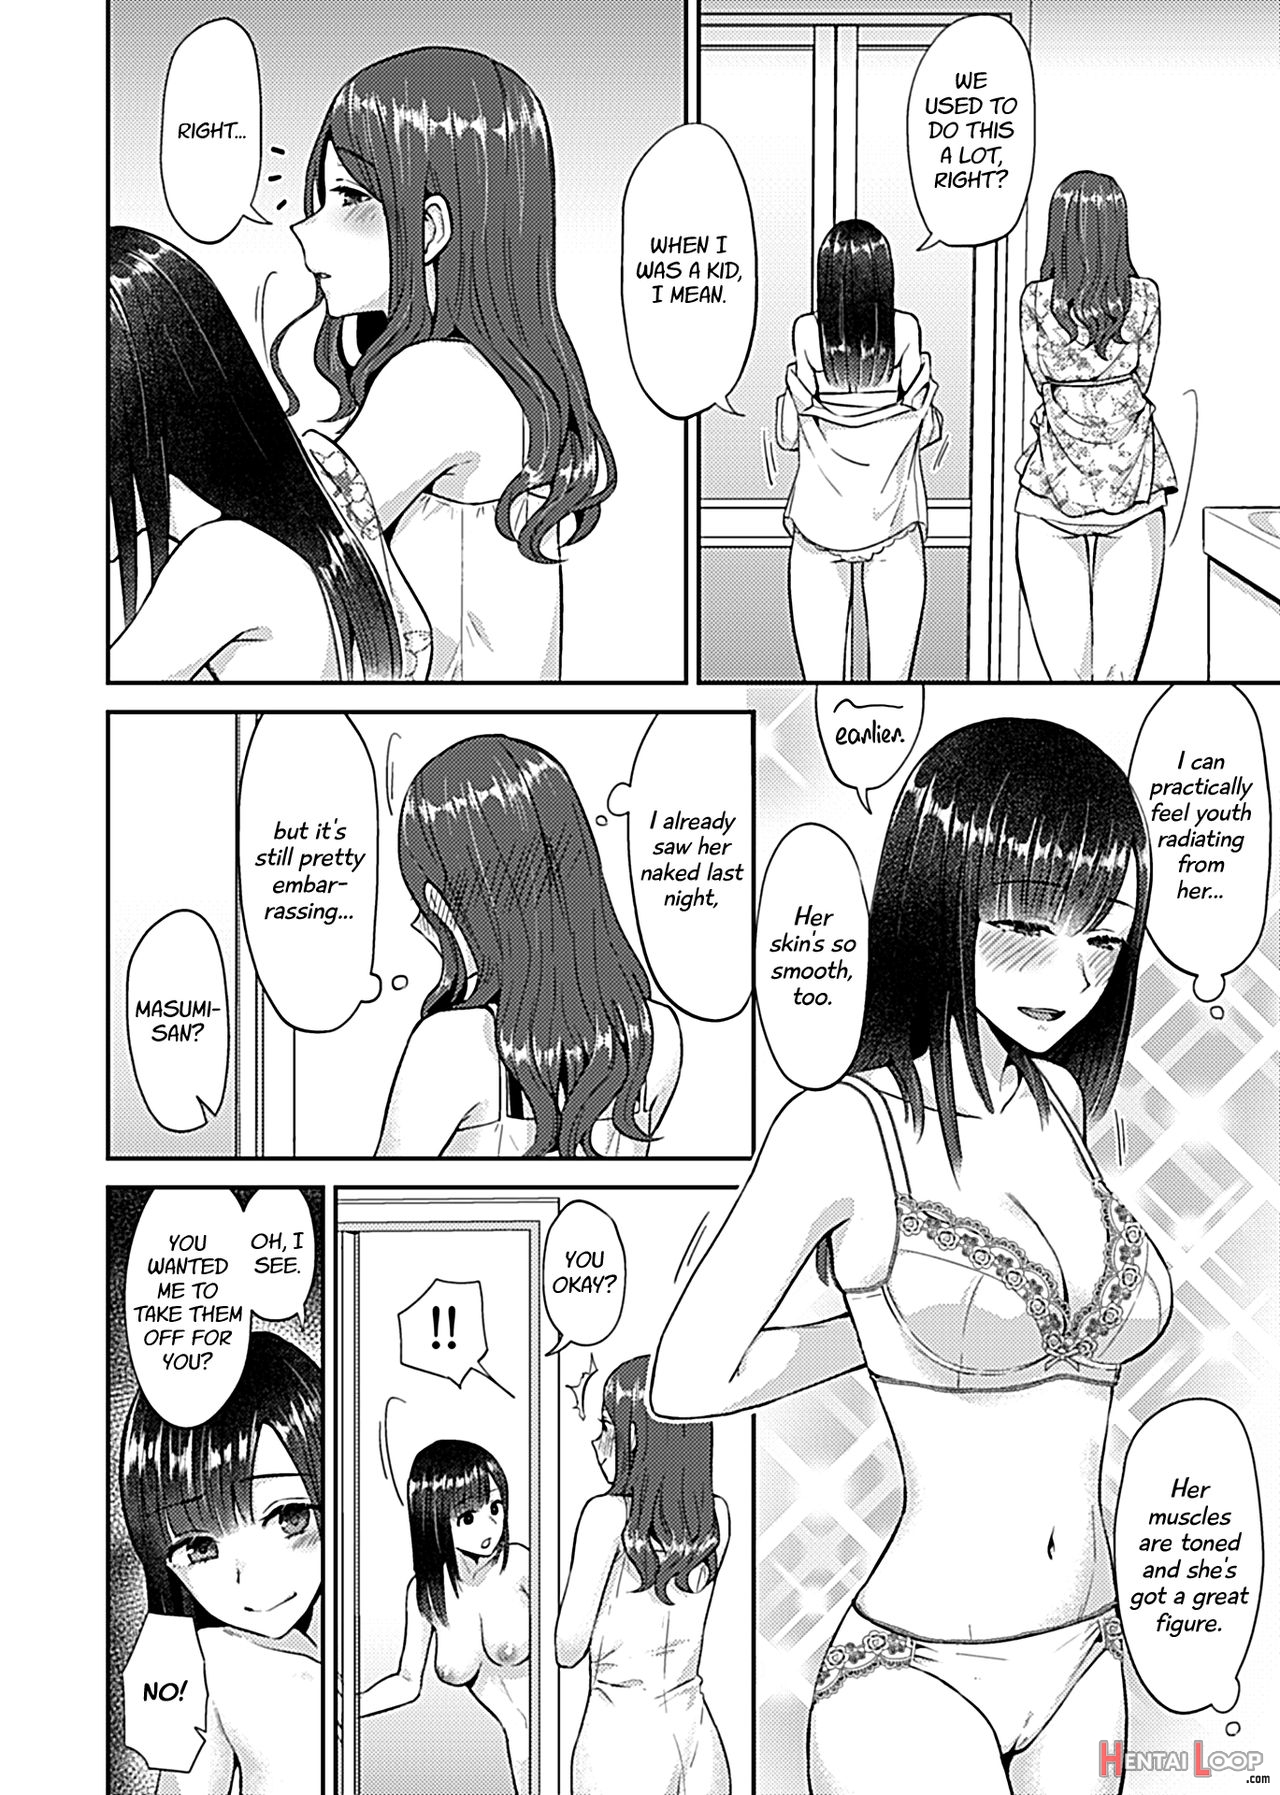 Lilies Are In Full Bloom - Volume 1 page 26